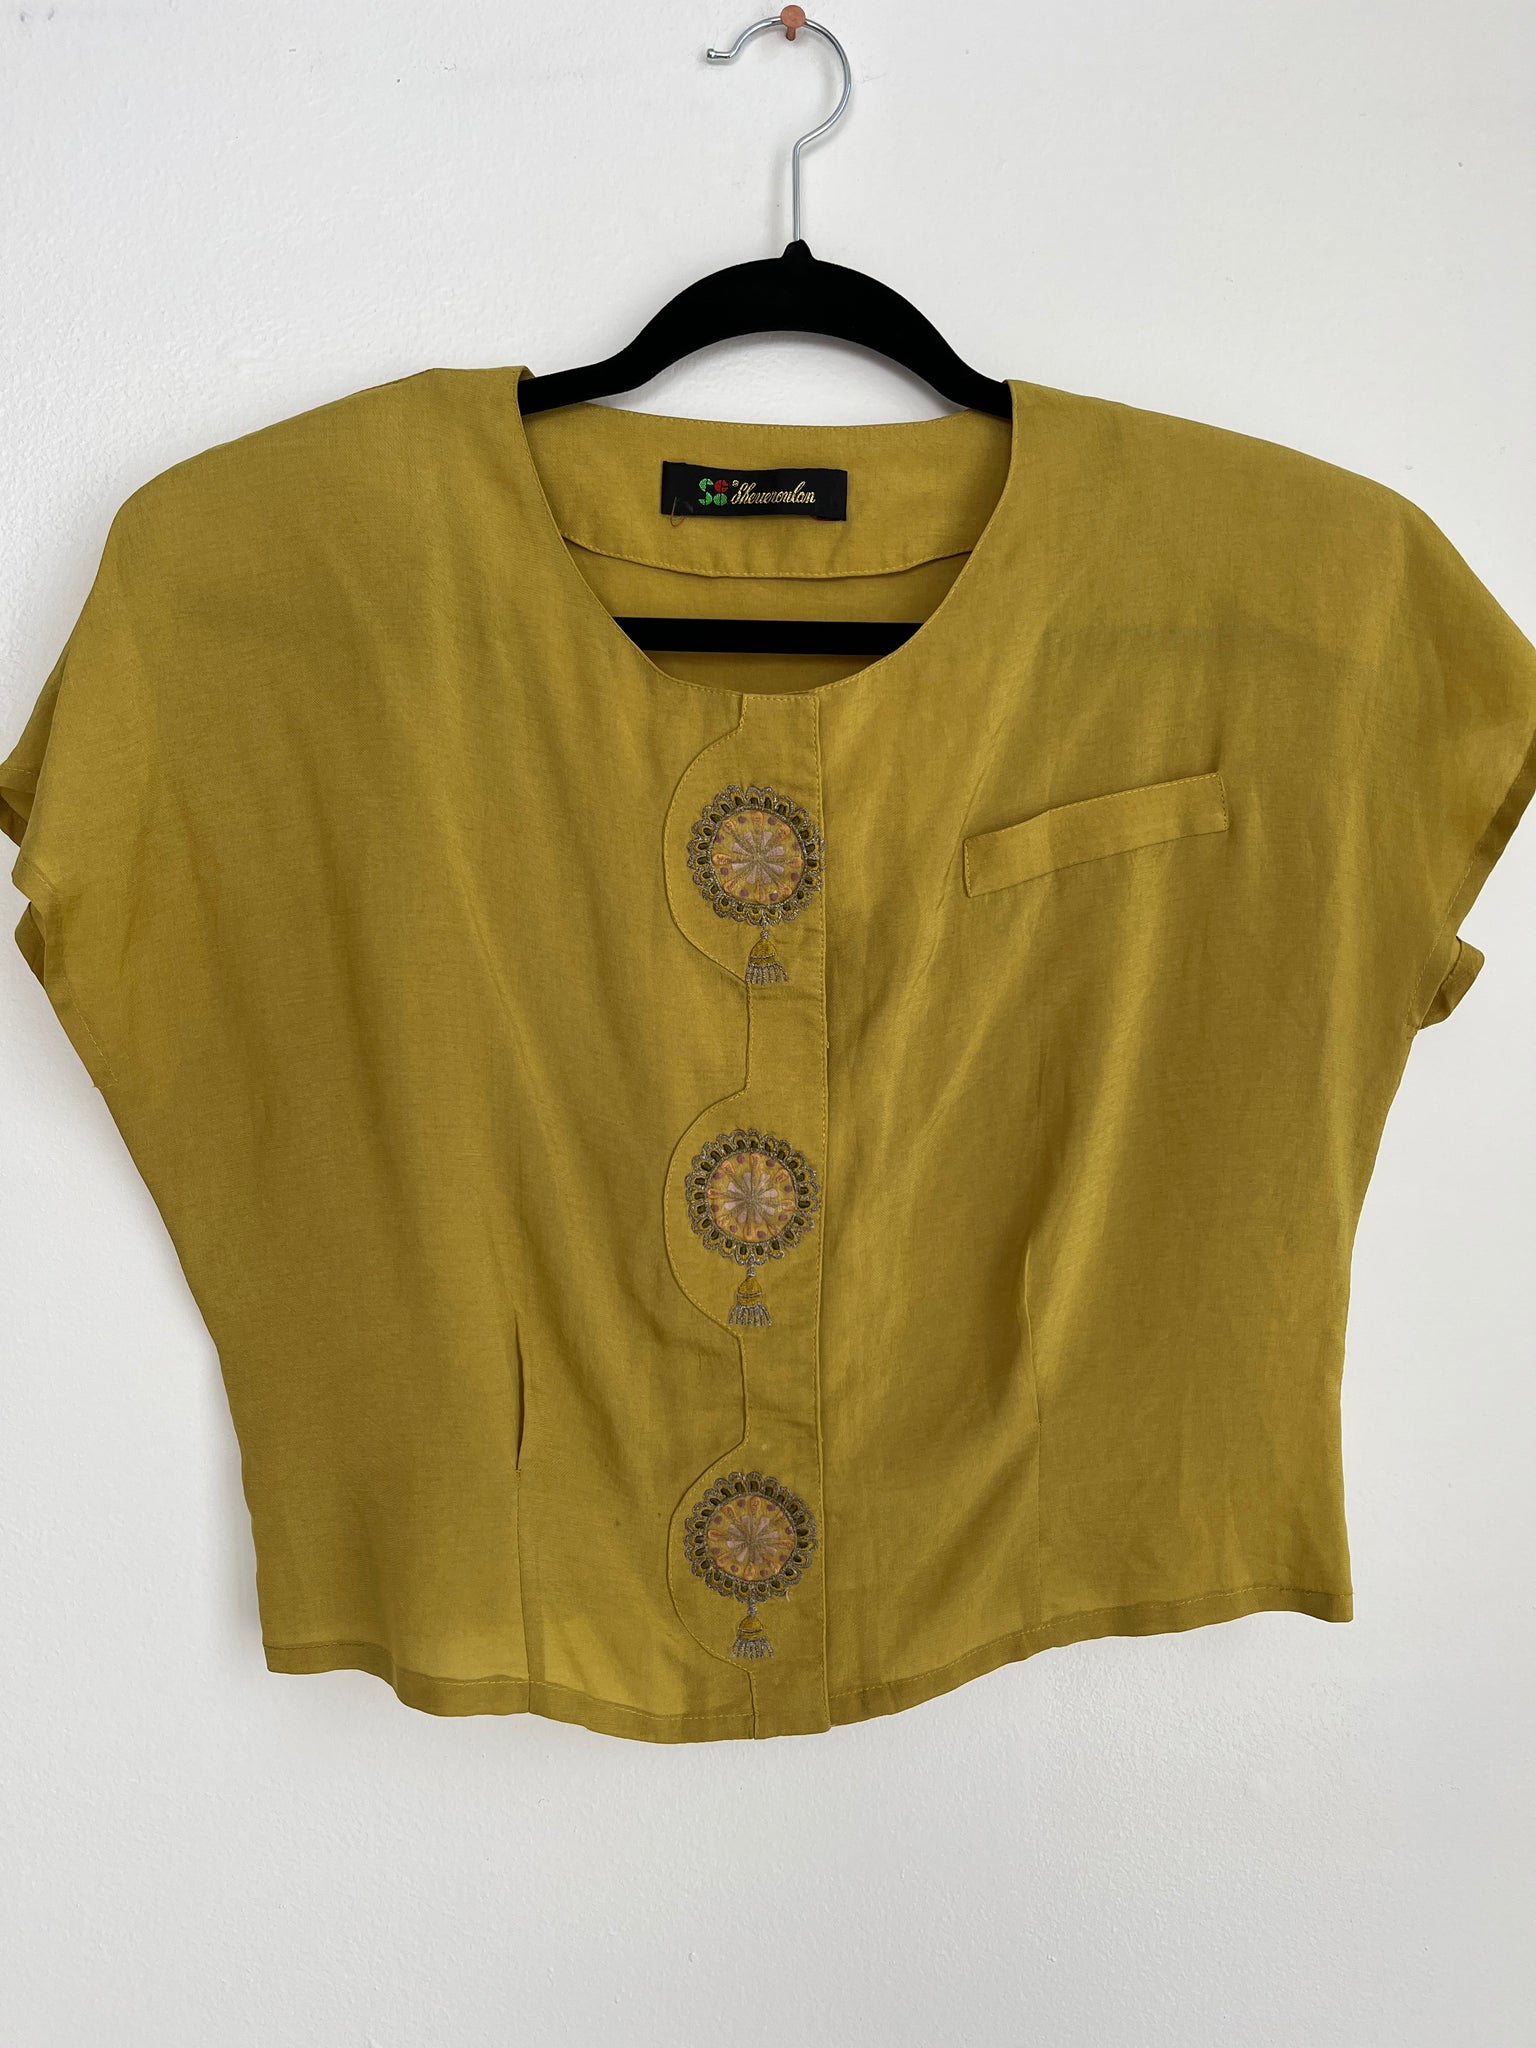 1990s TOP-chartruese rayon crop top w/front embroidery